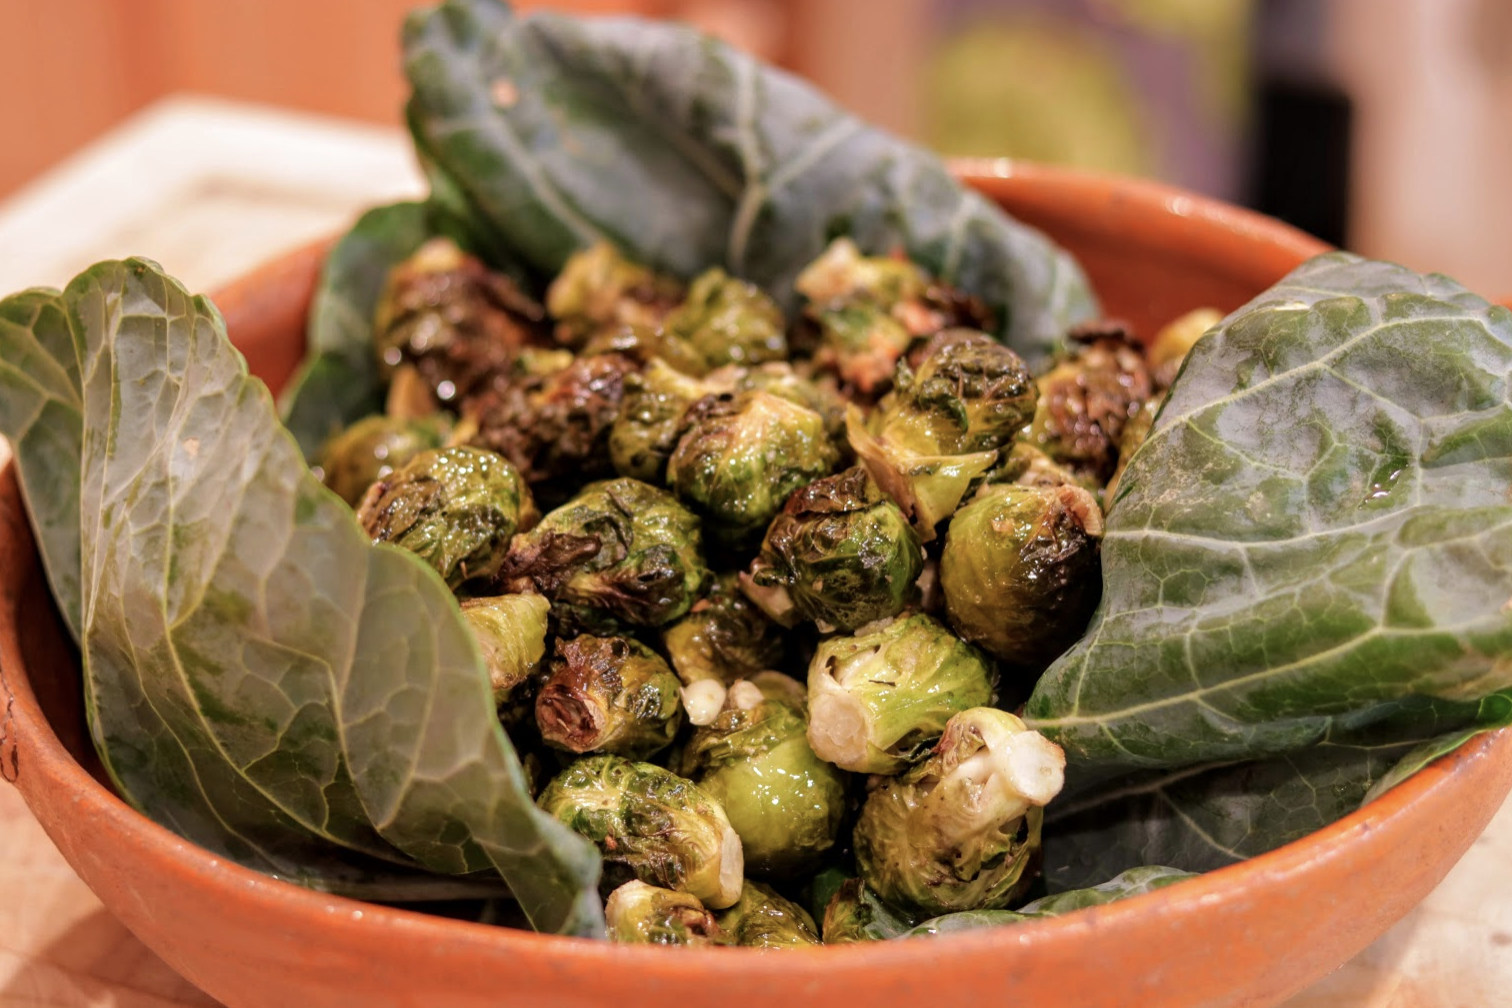 The finished dish of simple yet delicious, Brussels sprouts. Credit: Olivia Sanford / The Foothill Dragon Press